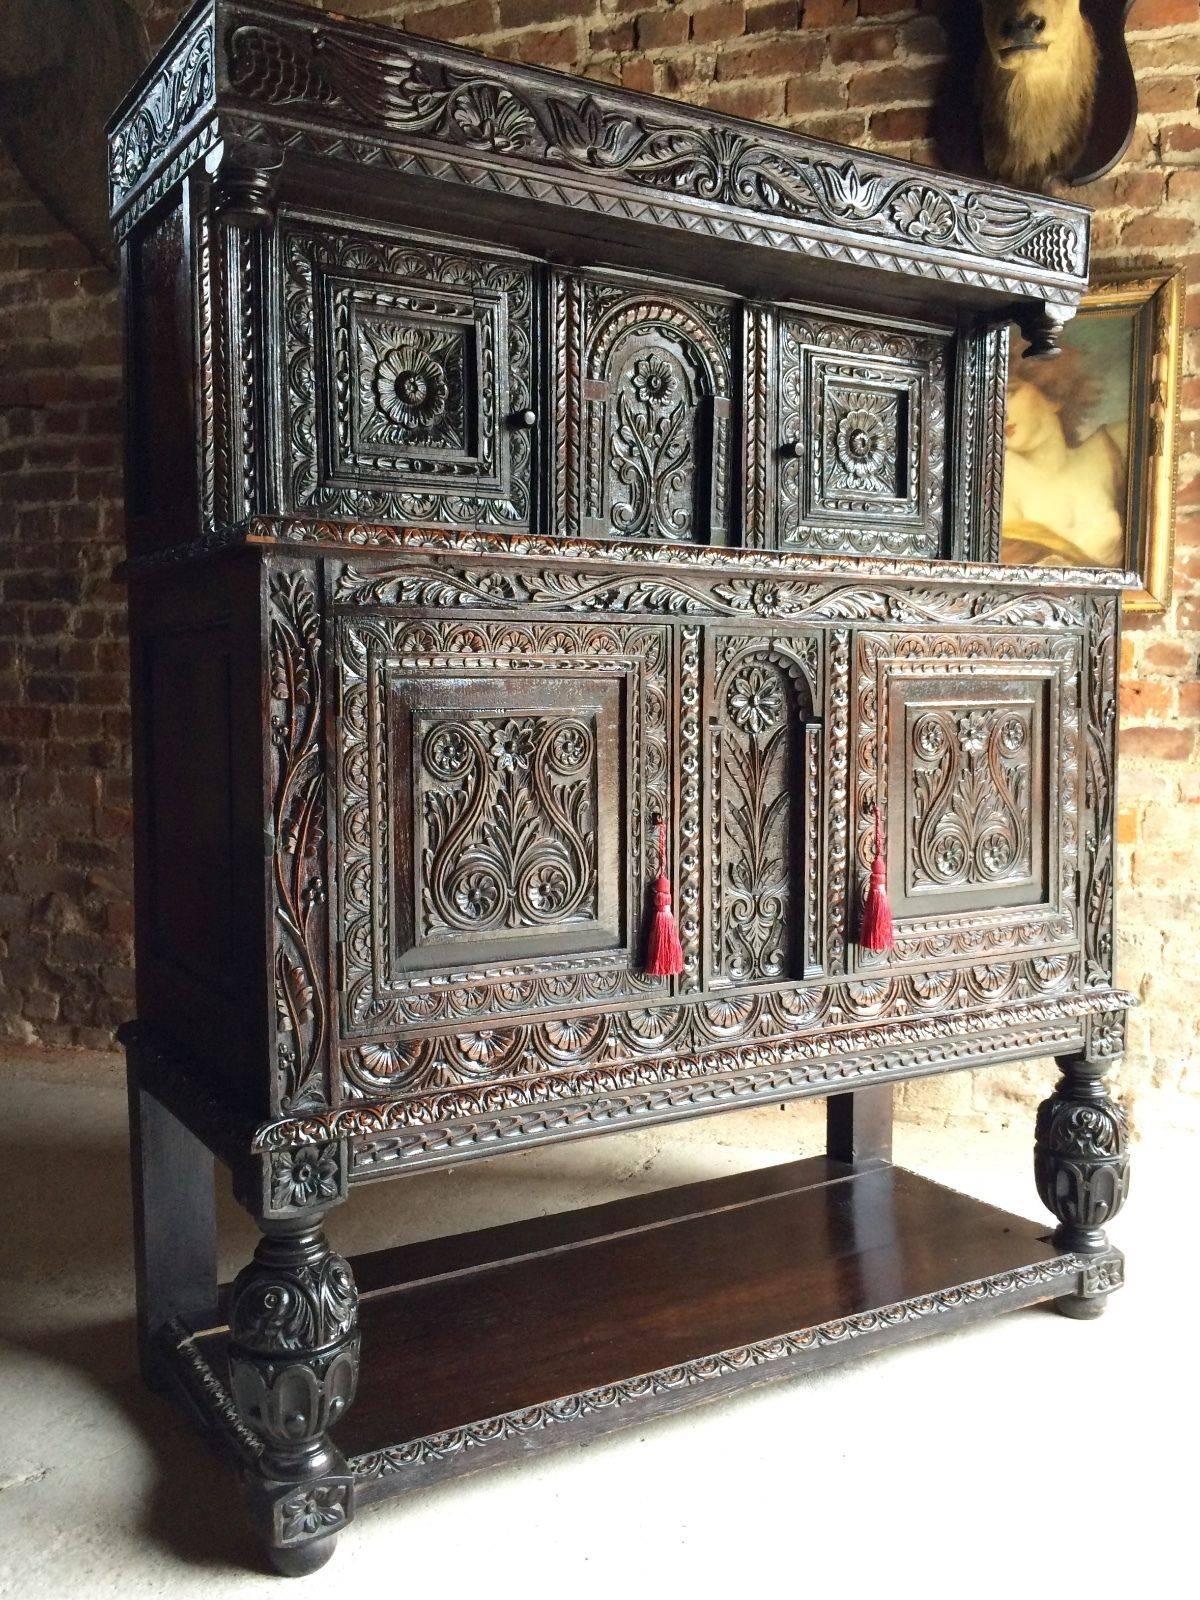 Jacobean Antique Sideboard Credenza Court Cupboard 18th Century George III Carved Oak